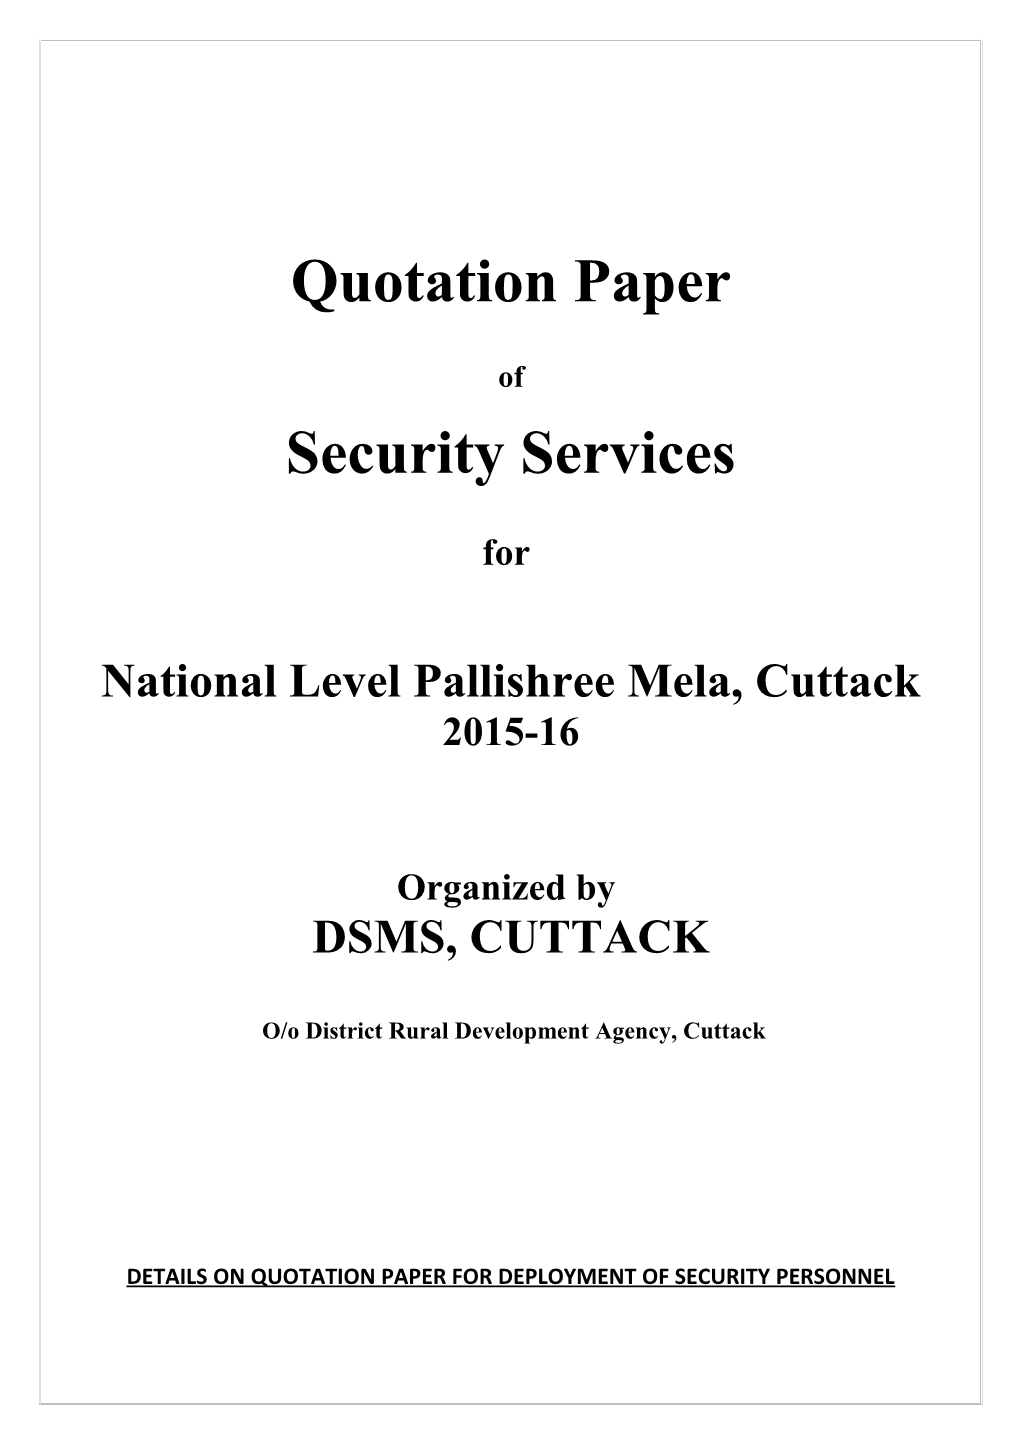 Quotation Paper for Security Deployment in National Level Pallishree Mela, Cuttack -2015-16